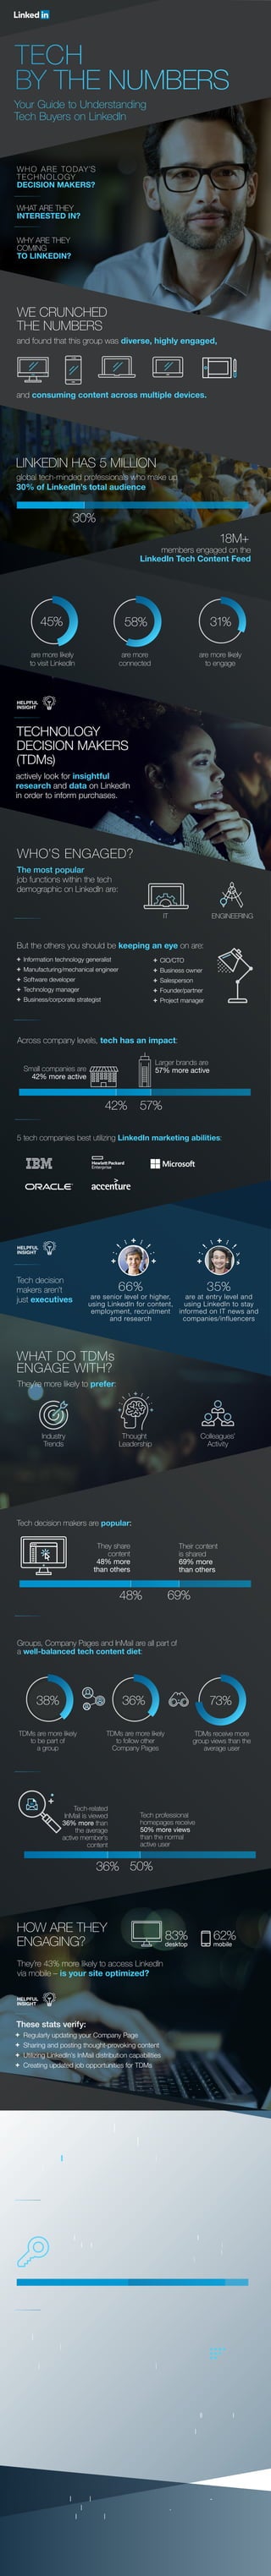 Your Guide to Understanding
Tech Buyers on LinkedIn
global tech-minded professionals who make up
30% of LinkedIn’s total audience
WHAT DO TDMs
ENGAGE WITH?
They’re more likely to prefer:
Industry
Trends
Thought
Leadership
Colleagues’
Activity
They share
content
48% more
than others
Their content
is shared
69% more
than others
TDMs are more likely
to be part of
a group
TDMs are more likely
to follow other
Company Pages
Groups, Company Pages and InMail are all part of
a well-balanced tech content diet:
With LinkedIn’s insights, you can easily, and
efficiently, target and engage tech buyers at the
right time with the right content.
Key targeting demographics:
Job function
Seniority
Company size
Activity
Location
Company
(important for ABM)
Key takeaways for tech decision makers:
Top IT products/services the tech buying
committee plans to purchase within the next 12
months: hardware, enterprise software, networks,
consulting, outsourcing and security applications
The buying committee’s
top destination for
content is the vendor’s
website, followed by blogs,
forums, discussion boards
and social media
Nearly 90% of
companies are currently
in the market for an IT
solution within
the next year
IT buyers are 67%
more likely to consider
a vendor who educates
at each stage of the
decision process
WHO ARE TODAY’S
TECHNOLOGY
DECISION MAKERS?
WHAT ARE THEY
INTERESTED IN?
WHY ARE THEY
COMING
TO LINKEDIN?
WE CRUNCHED
THE NUMBERS
LINKEDIN HAS 5 MILLION
and found that this group was diverse, highly engaged,
and consuming content across multiple devices.
ENGINEERINGIT
WHO’S ENGAGED?
The most popular
job functions within the tech
demographic on LinkedIn are:
But the others you should be keeping an eye on are:
CIO/CTO
Business owner
Salesperson
Founder/partner
Project manager
Information technology generalist
Manufacturing/mechanical engineer
Software developer
Technology manager
Business/corporate strategist
5 tech companies best utilizing LinkedIn marketing abilities:
35%
are at entry level and
using LinkedIn to stay
informed on IT news and
companies/influencers
66%
are senior level or higher,
using LinkedIn for content,
employment, recruitment
and research
TDMs receive more
group views than the
average user
73%36%38%
are more likely
to engage
are more
connected
TECHNOLOGY
DECISION MAKERS
(TDMs)
HELPFUL
INSIGHT
actively look for insightful
research and data on LinkedIn
in order to inform purchases.
Tech decision
makers aren’t
just executives
With LinkedIn’s help, you can use a more accurate, hyper-targeted
and meaningful way to reach your audience. Find out more about
how LinkedIn can help you engage with a broad range of tech
buyers and decision makers today!
WHAT DOES THIS MEAN FOR
TECH MARKETERS IN 2017?
Tech decision makers are popular:
They’re 43% more likely to access LinkedIn
via mobile – is your site optimized?
HOW ARE THEY
ENGAGING? 62%
mobile
83%
desktop
These stats verify:
Regularly updating your Company Page
Sharing and posting thought-provoking content
Utilizing LinkedIn’s InMail distribution capabilities
Creating updated job opportunities for TDMs
Tech professional
homepages receive
50% more views
than the normal
active user
Tech-related
InMail is viewed
36% more than
the average
active member’s
content
HELPFUL
INSIGHT
45%
are more likely
to visit LinkedIn
30%
members engaged on the
LinkedIn Tech Content Feed
18M+
Small companies are
42% more active
Larger brands are
57% more active
Across company levels, tech has an impact:
42% 57%
48% 69%
36% 50%
31%
67% 90%
58%
HELPFUL
INSIGHT
Data cited reflects LinkedIn platform data pulled and reported October 2016
 